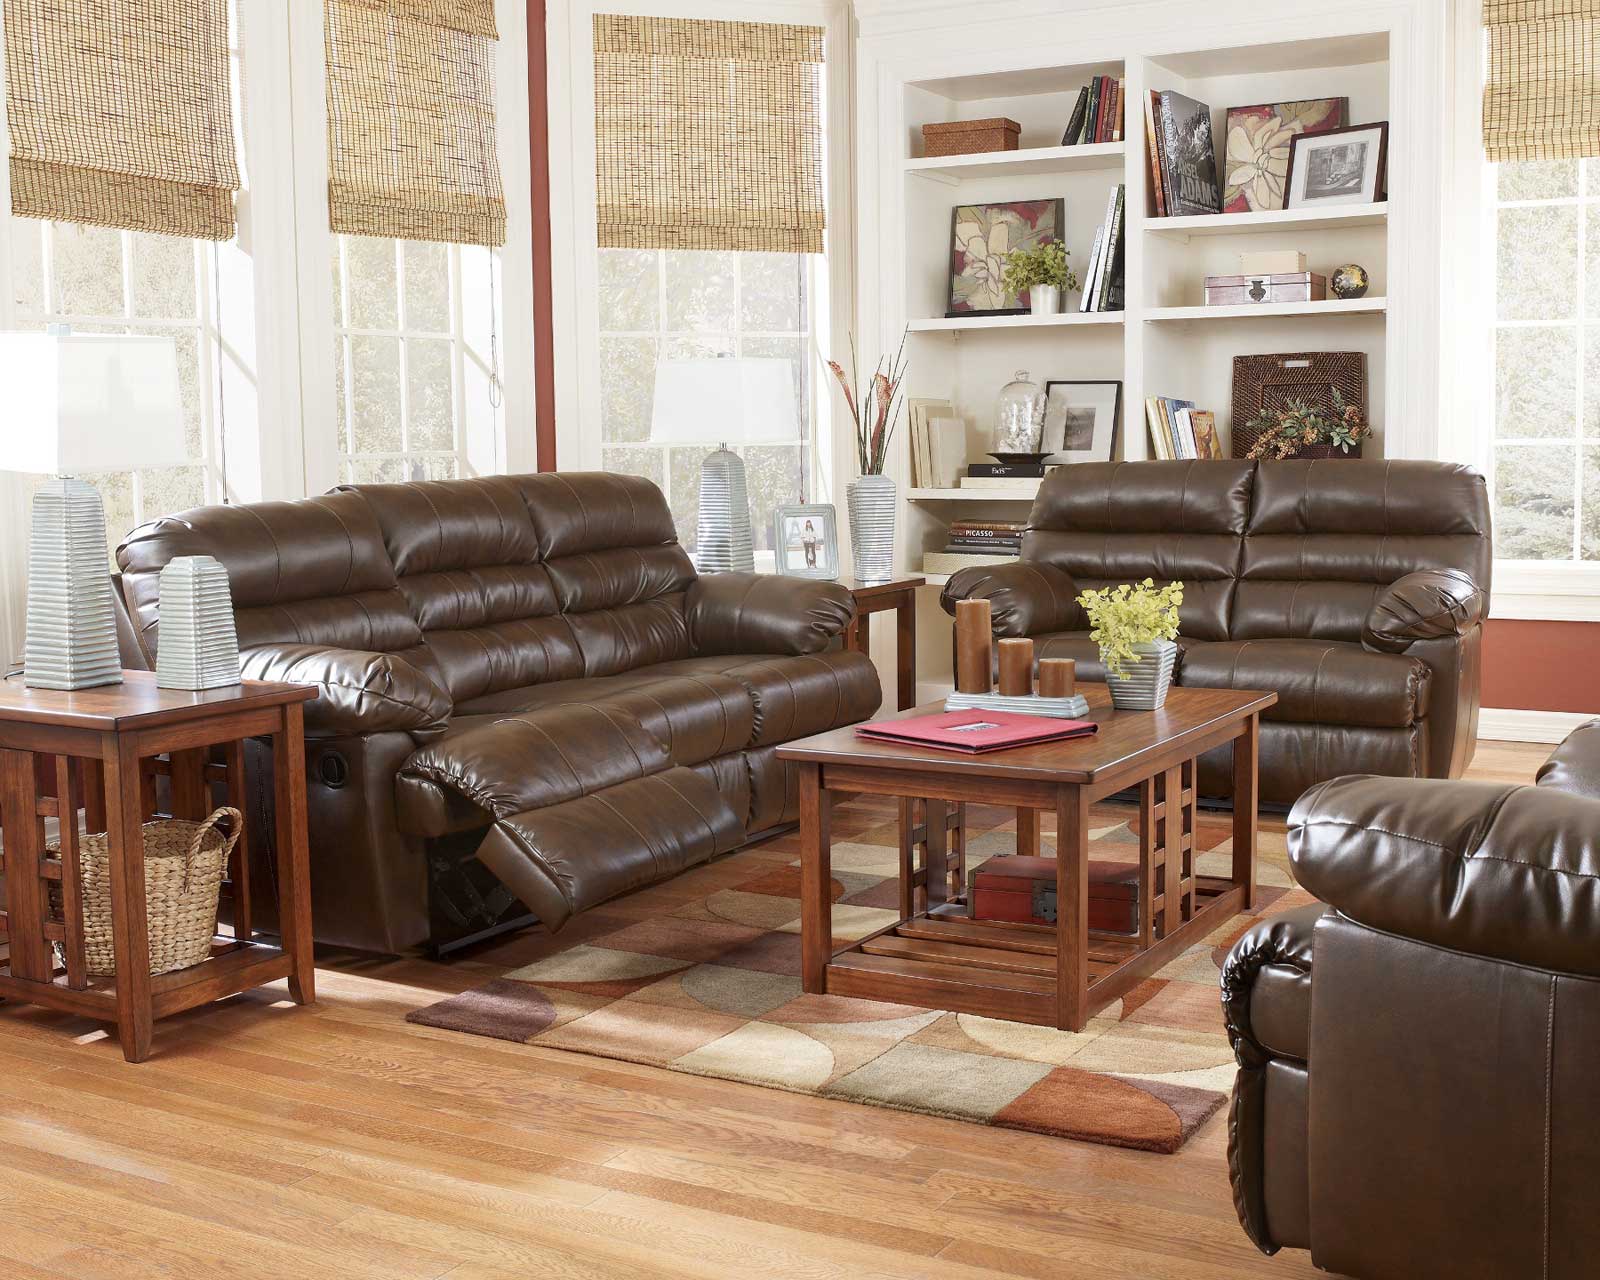 Living Room For Charming Living Room Sets Furniture For Small Home Design Ideas With Classic Leather Sofa Couches Sets Design And Natural Rattan Curtain Styles Also Rustic Wood Floor Design Living Room Beautiful Living Room Sets As Suitable Furniture